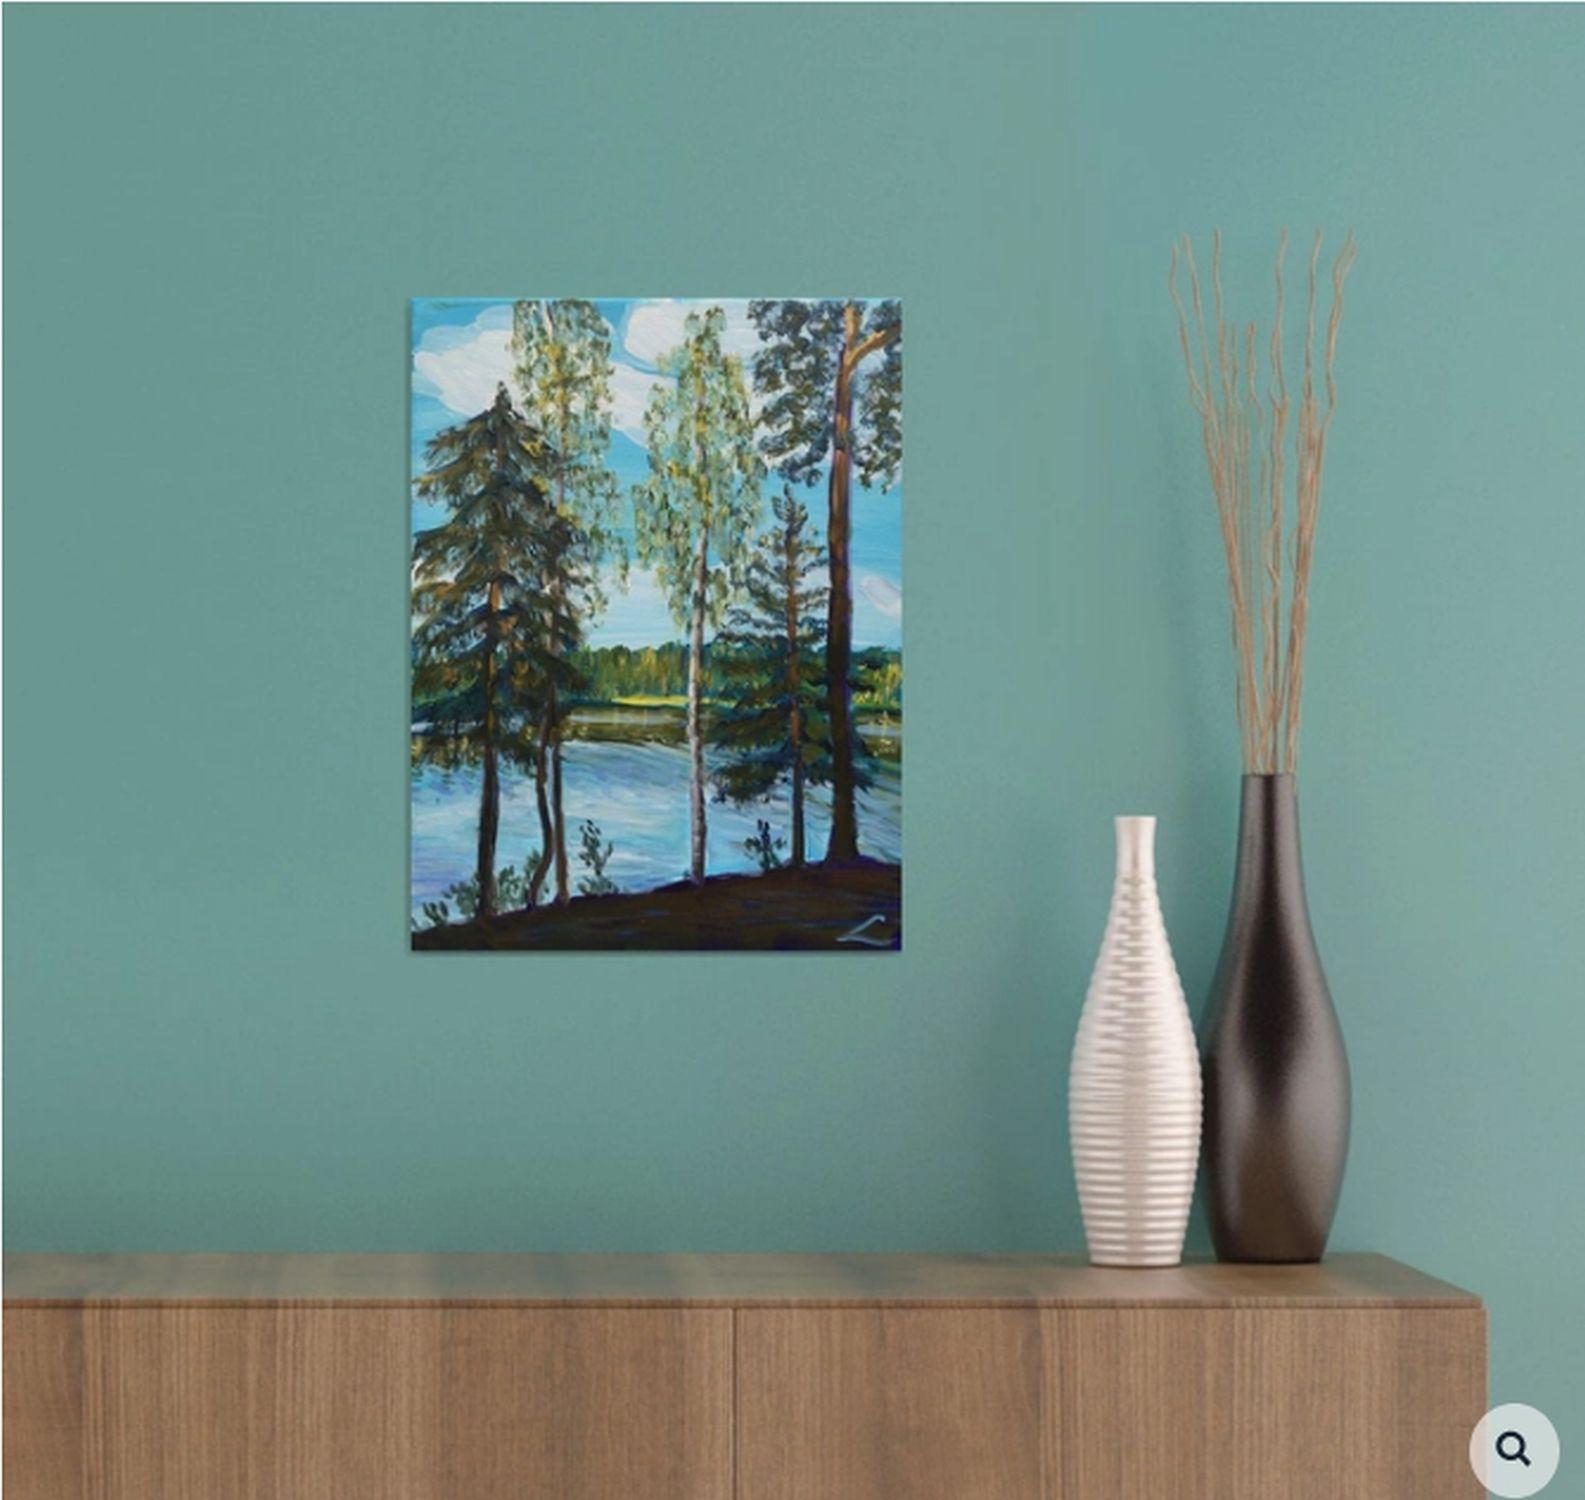 Landscape with trees at the lake. Studio painting done after the plain ait on the location. :: Painting :: Impressionist :: This piece comes with an official certificate of authenticity signed by the artist :: Ready to Hang: Yes :: Signed: Yes ::